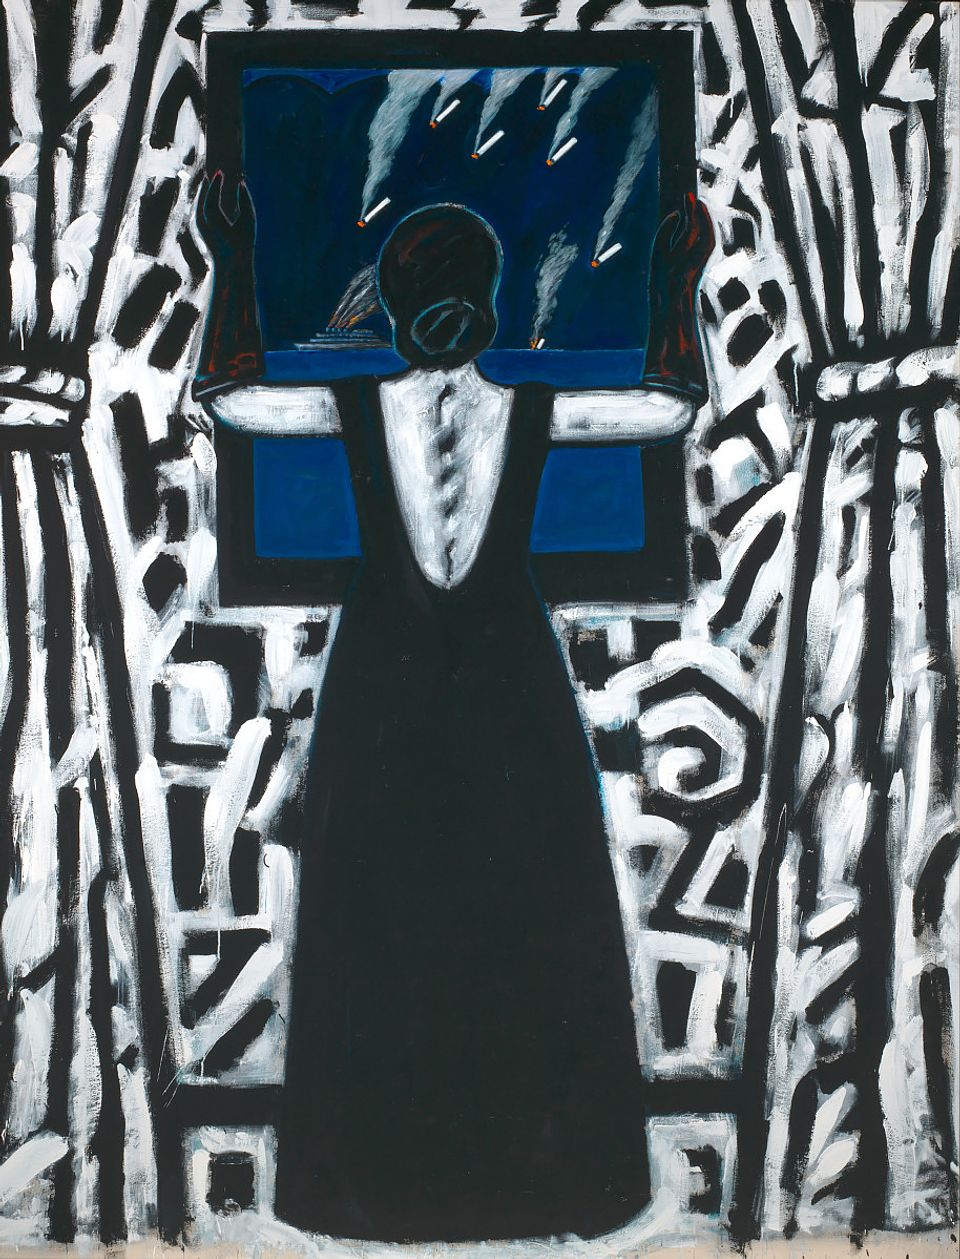 Acrylic on canvas of a woman looking out of a window as bombs are dropped outside.